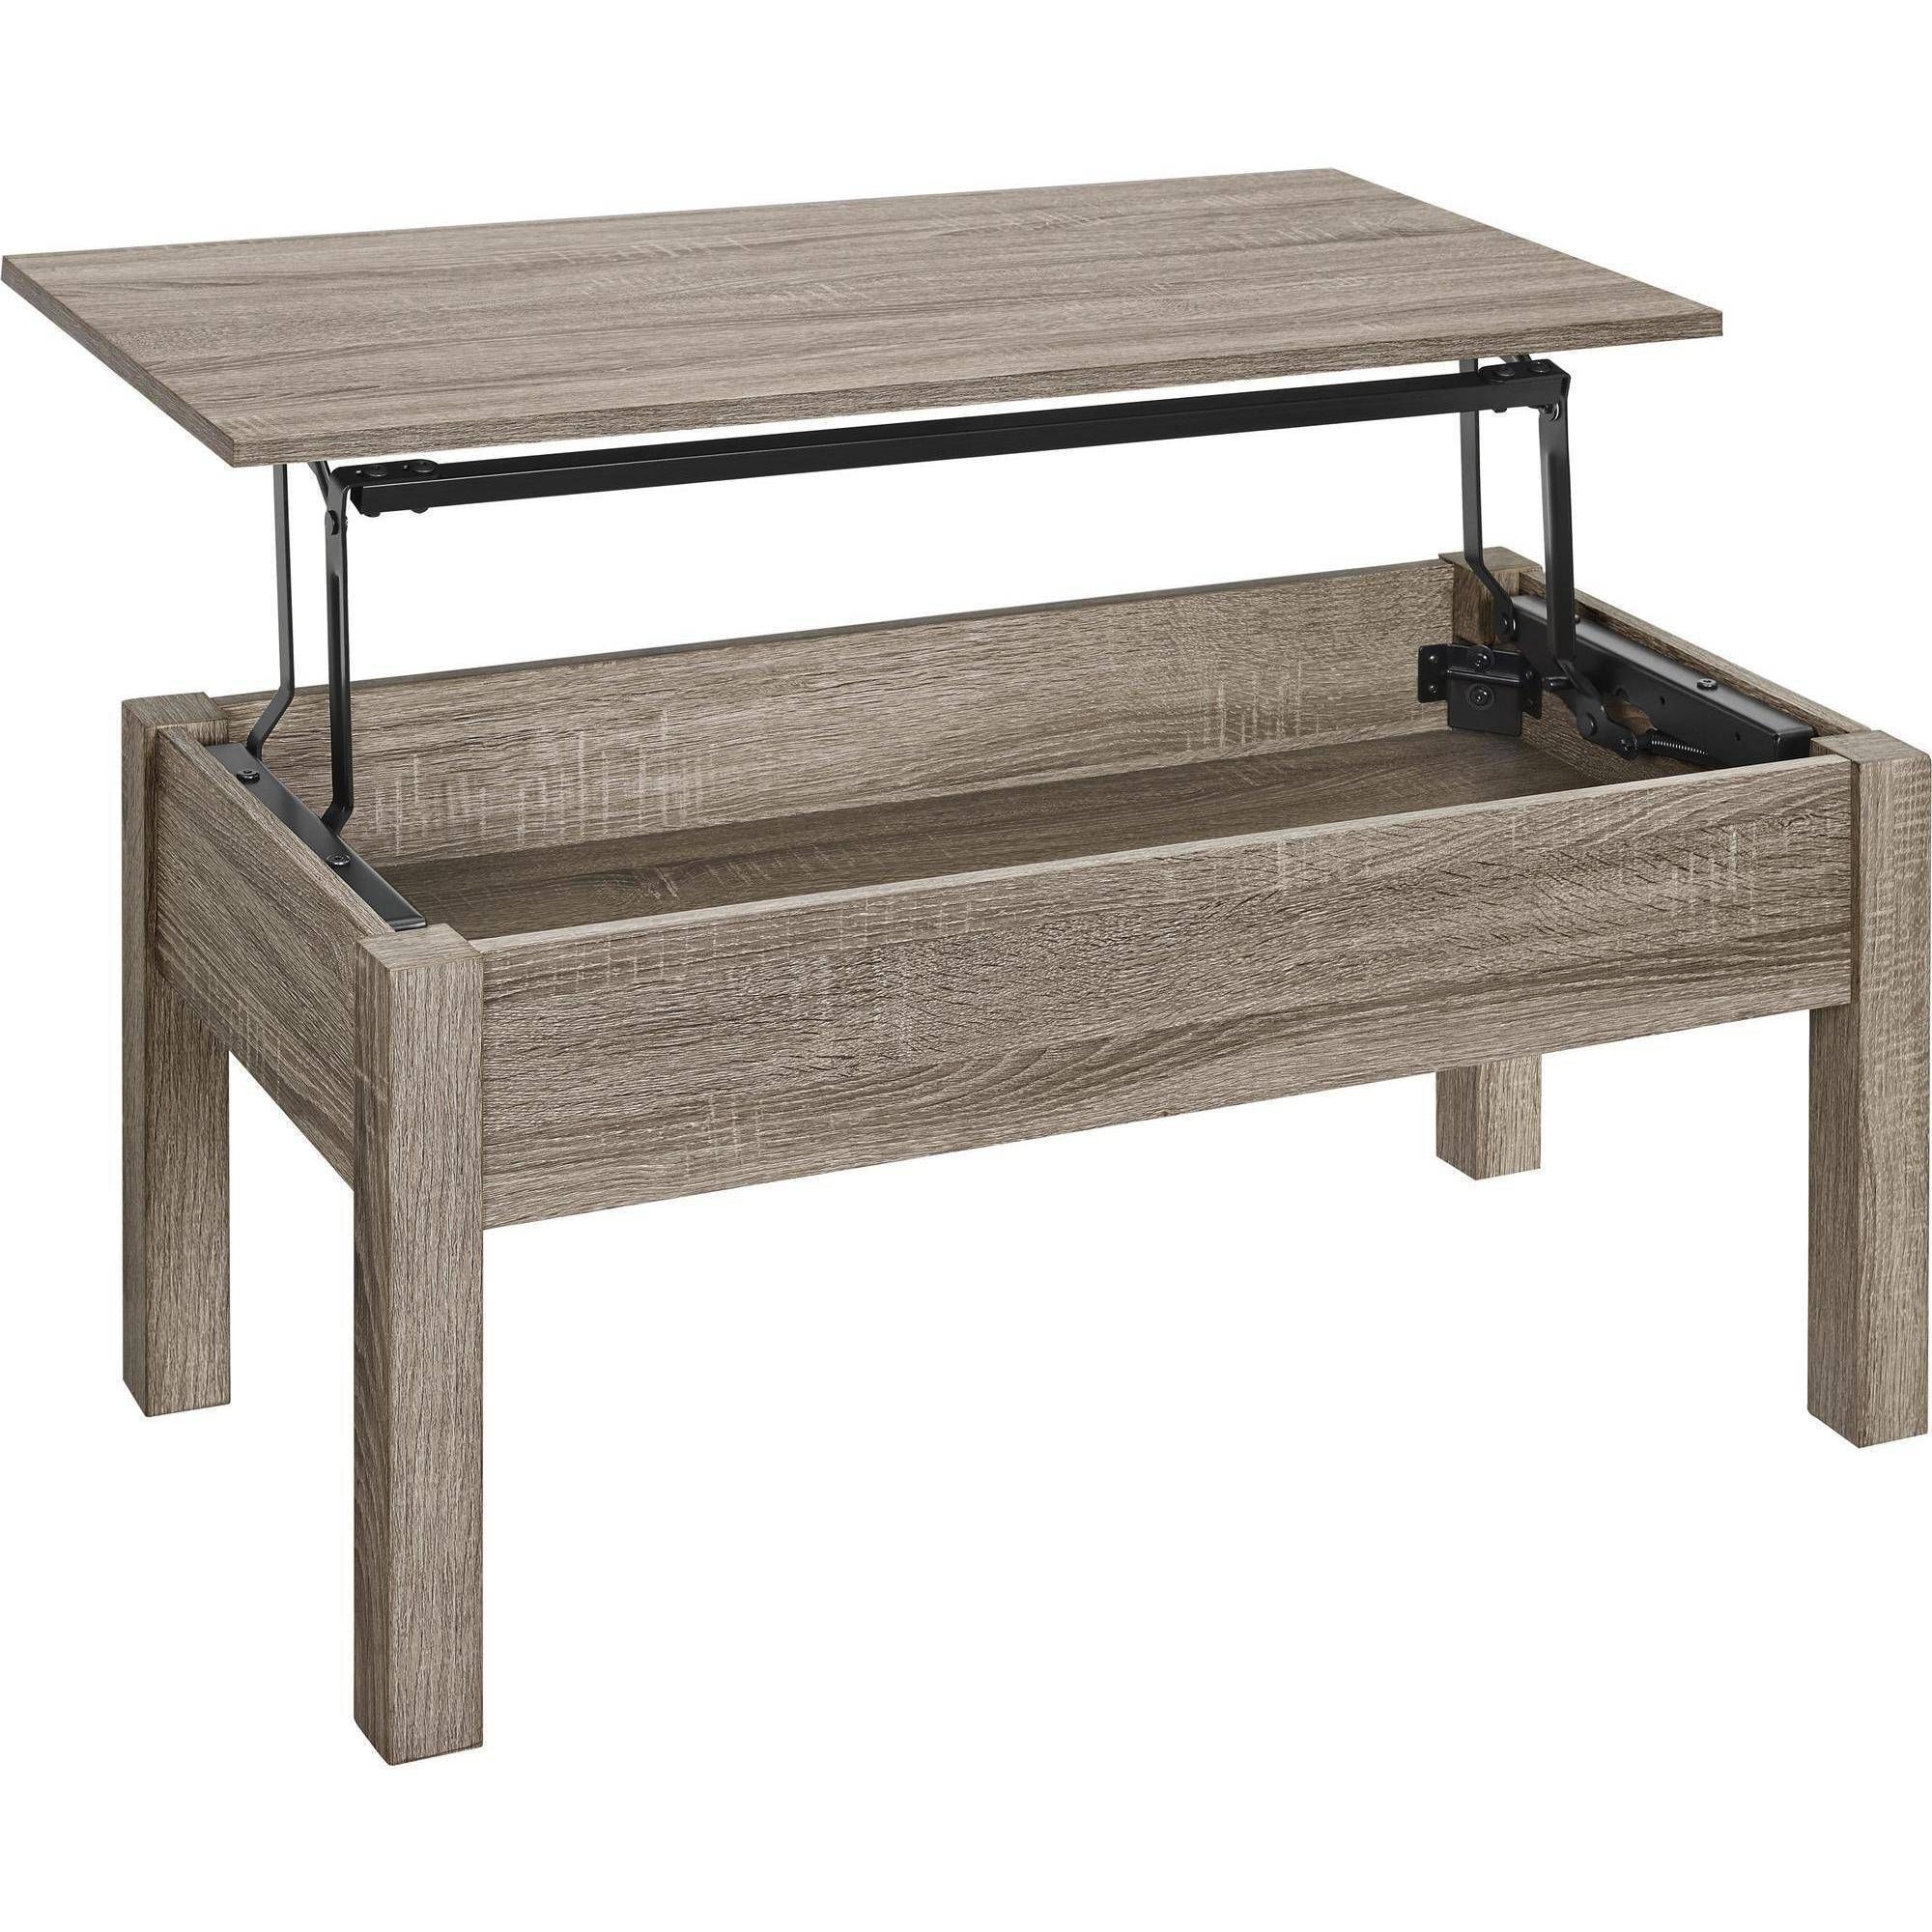 Mainstays Lift Top Coffee Table, Multiple Colors – Walmart Regarding Coffee Tables With Lifting Top (View 1 of 30)